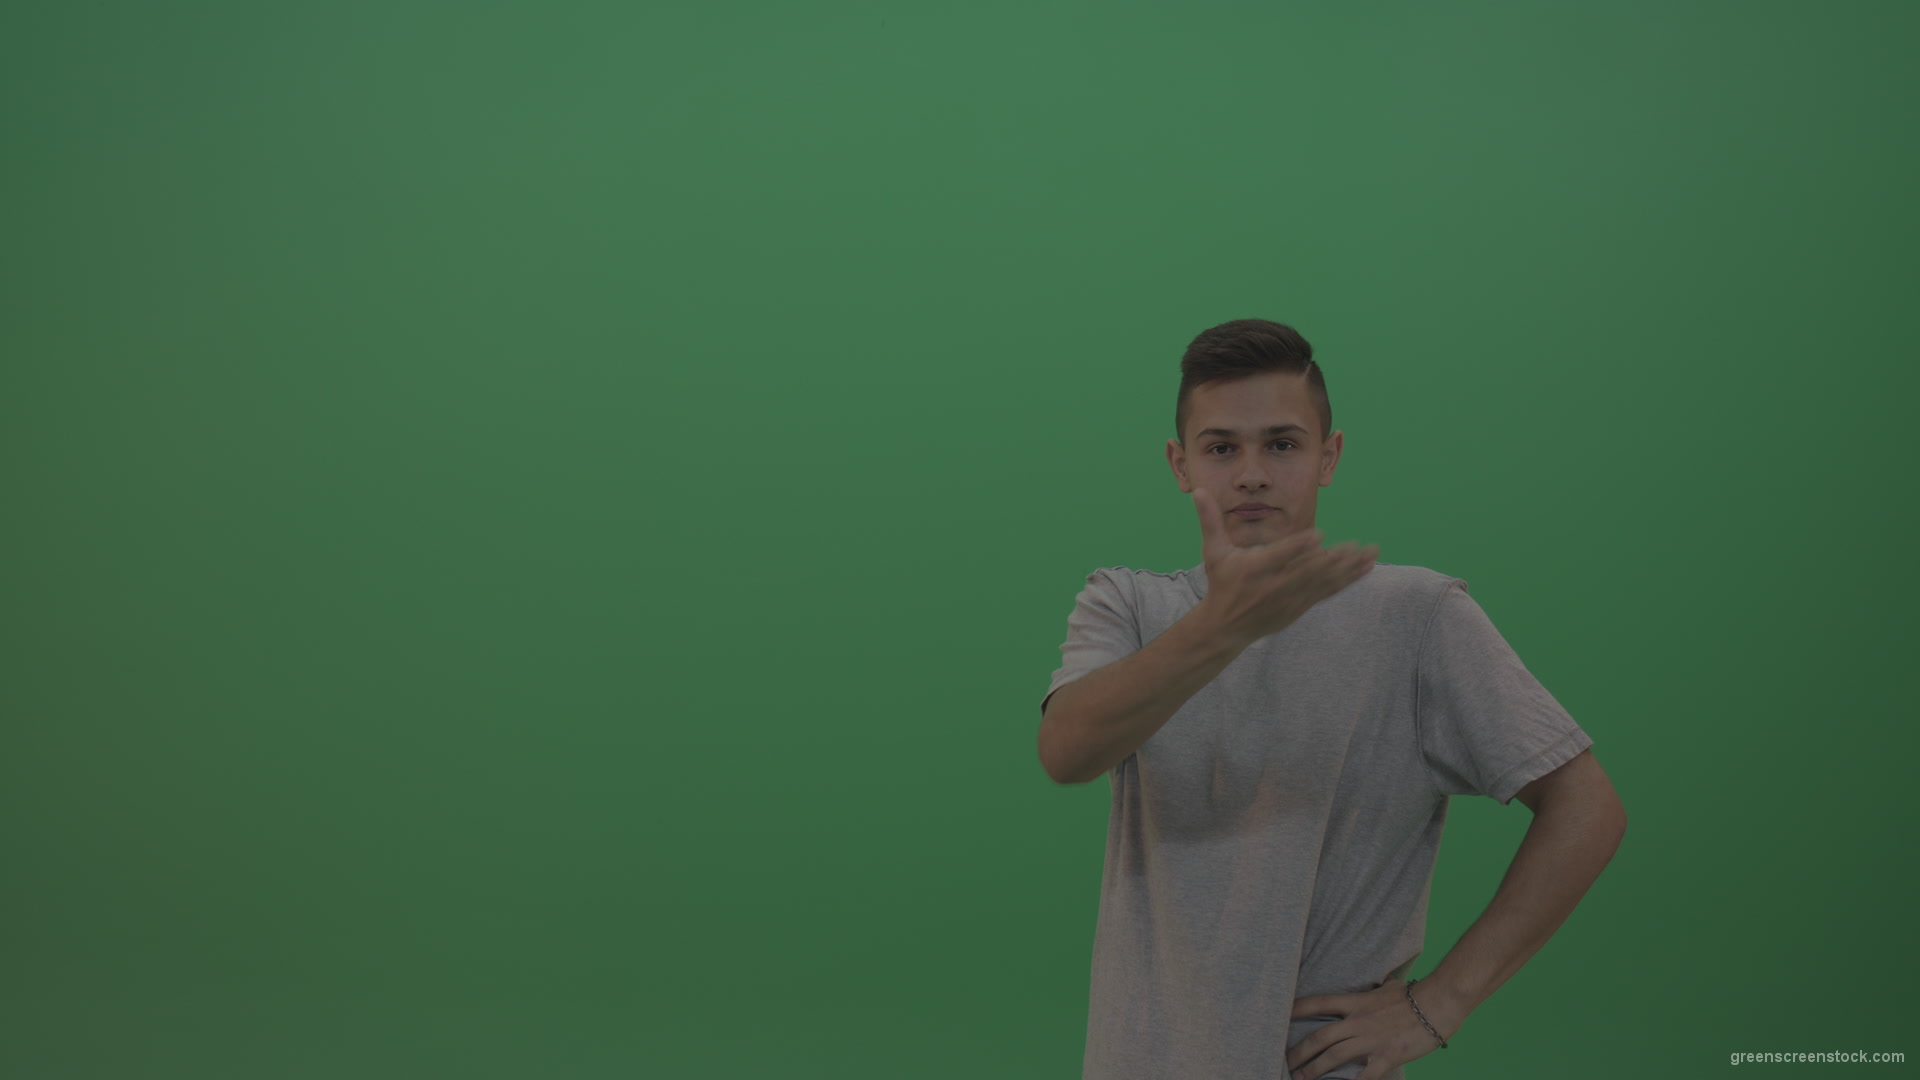 Boy-in-grey-wear-expresses-disappointment-over-green-screen-background_008 Green Screen Stock